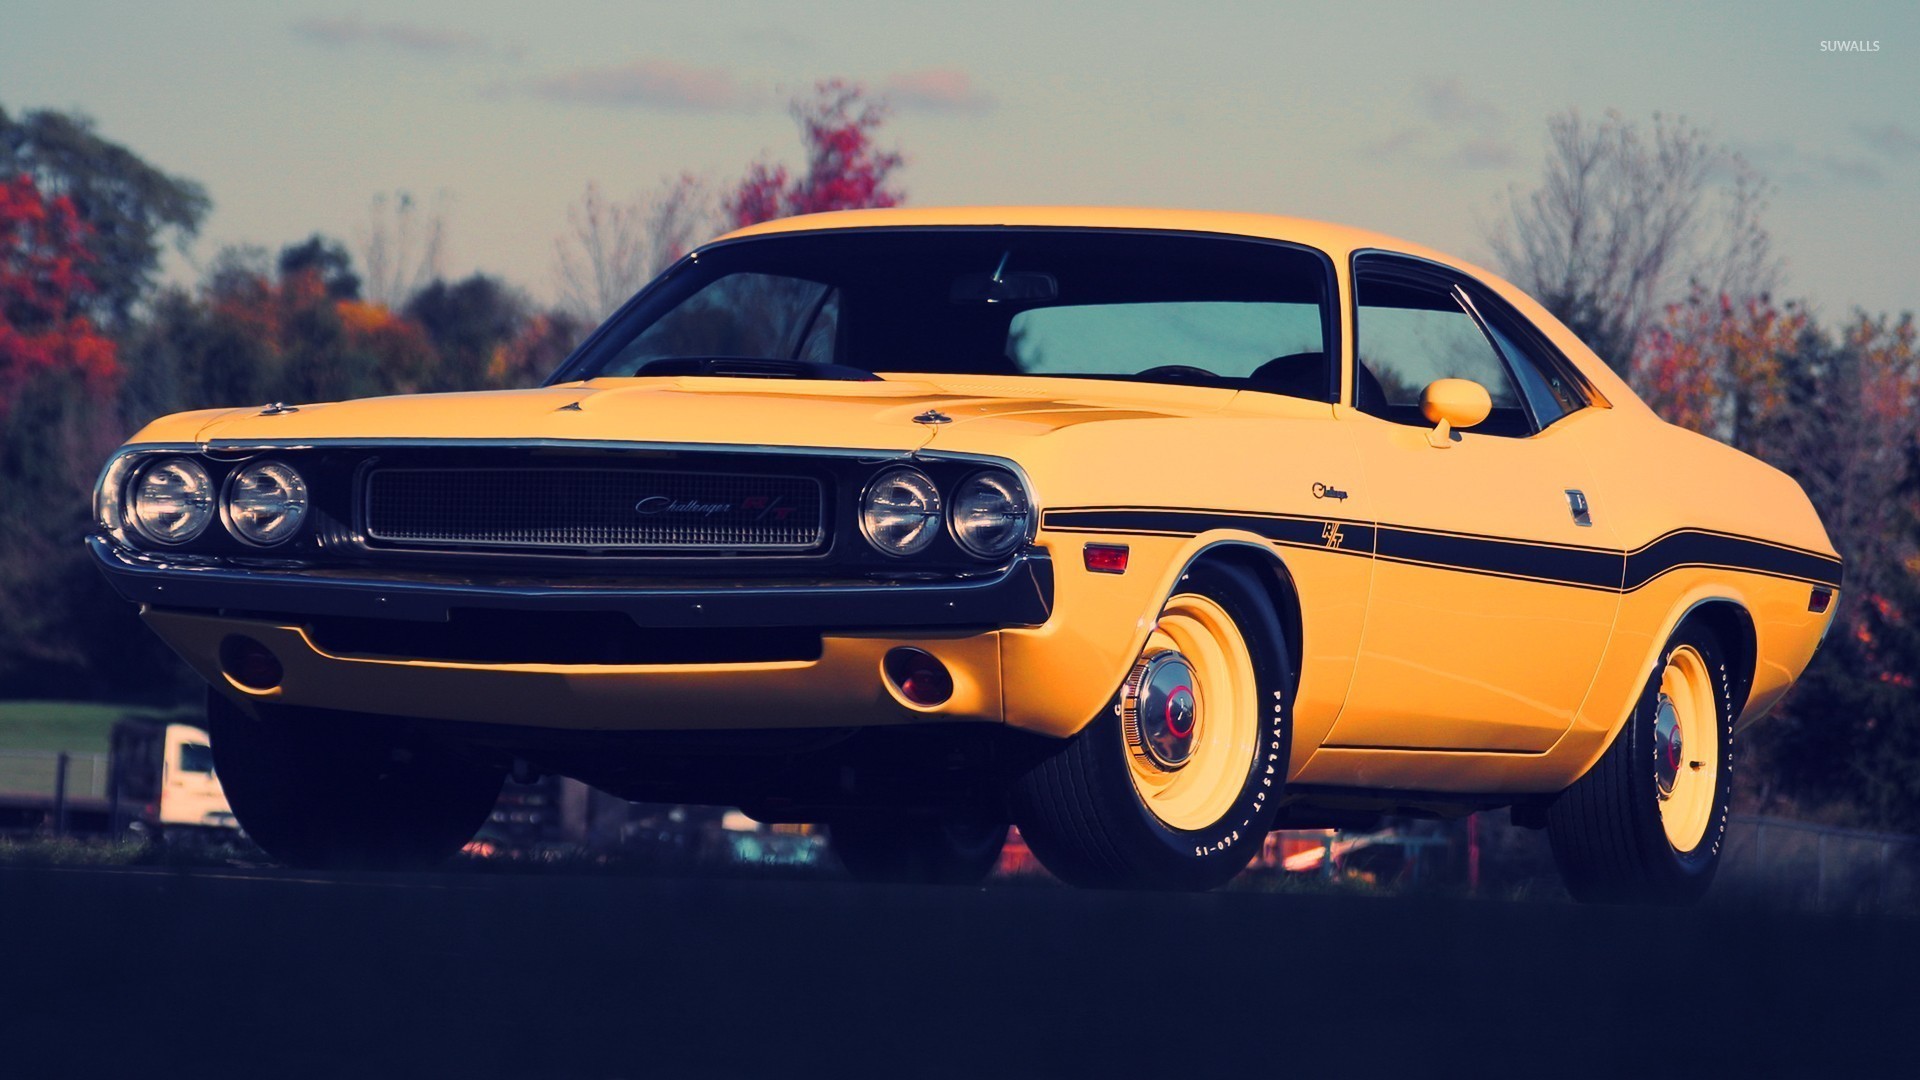 1920x1080 Yellow Dodge Challenger front side view wallpaper